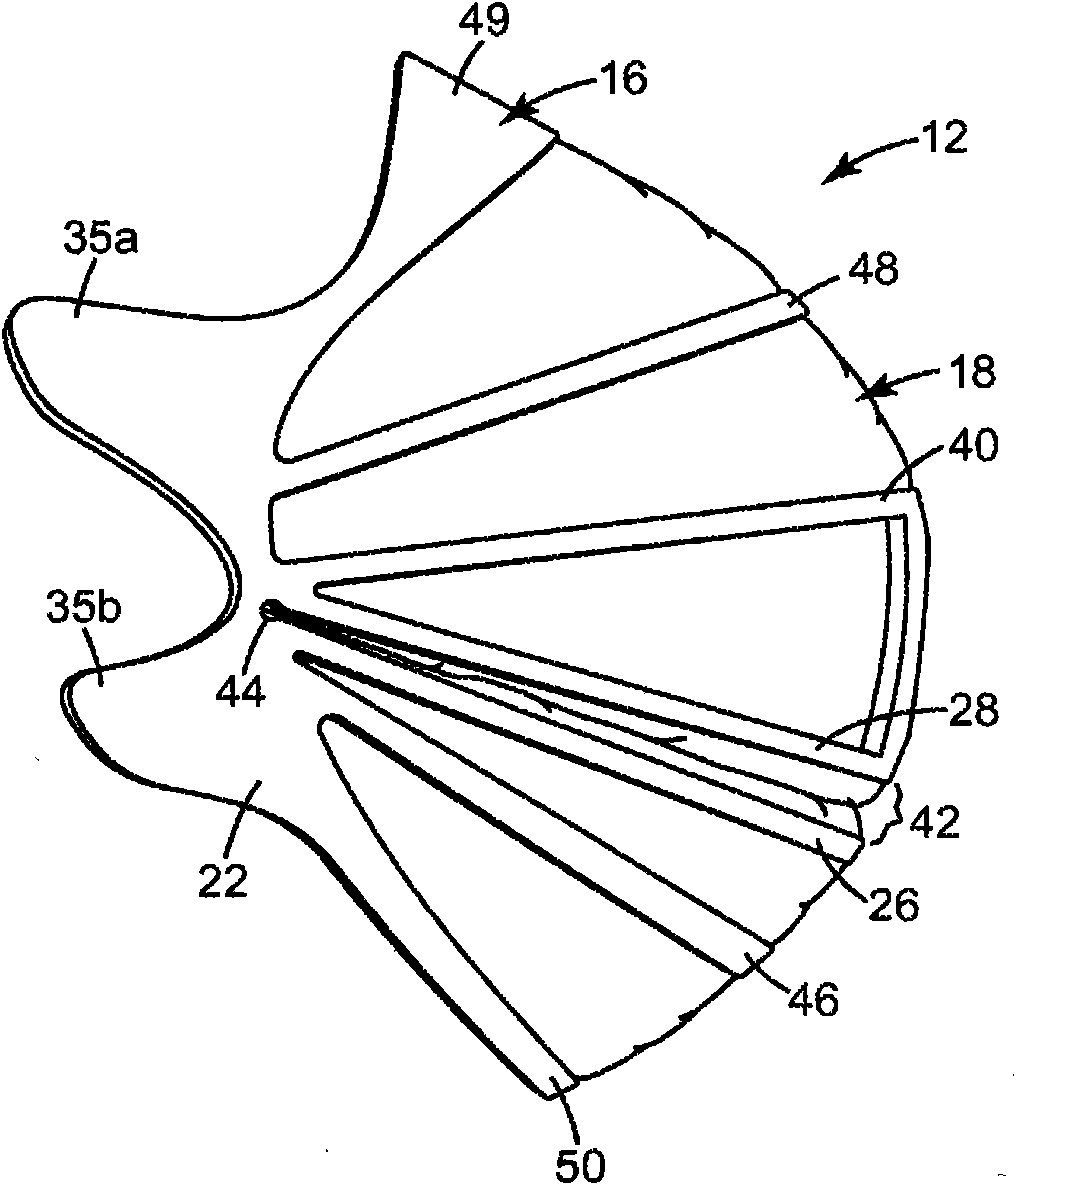 Respirator having dynamic support structure and pleated filtering structure